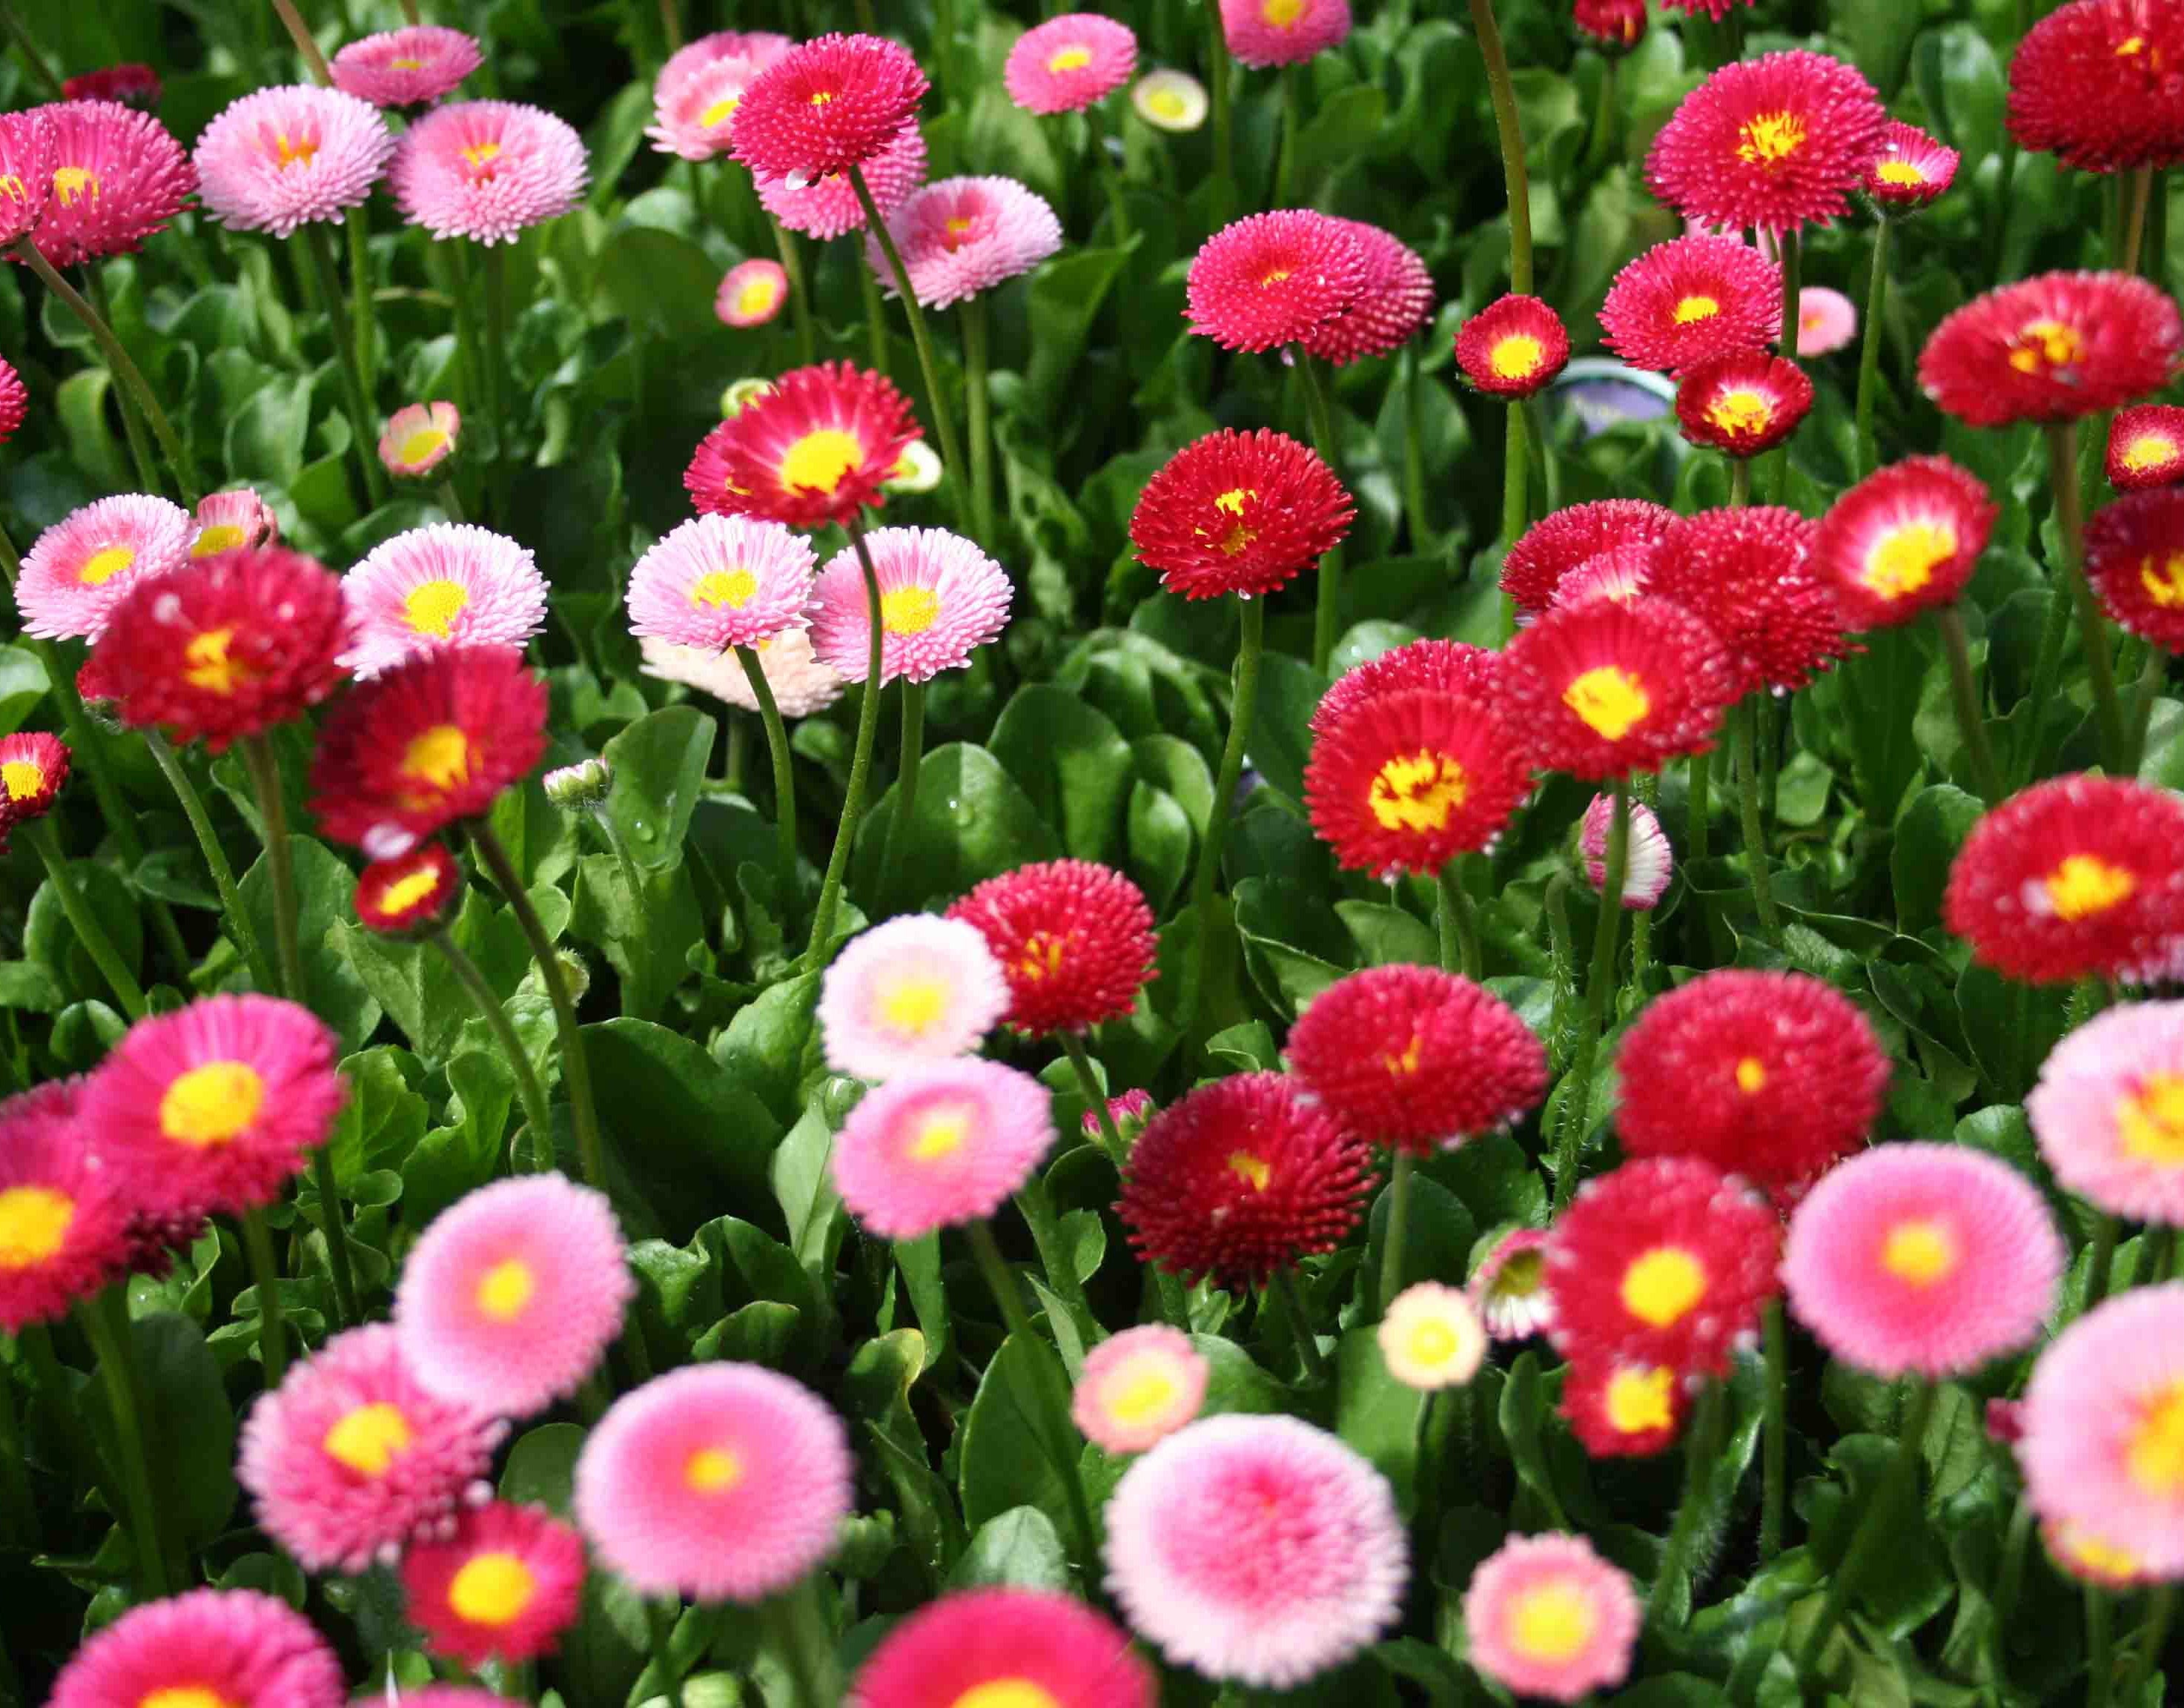 Buy Premium Quality Daisy Double Mixed Seeds at AllThatGrows